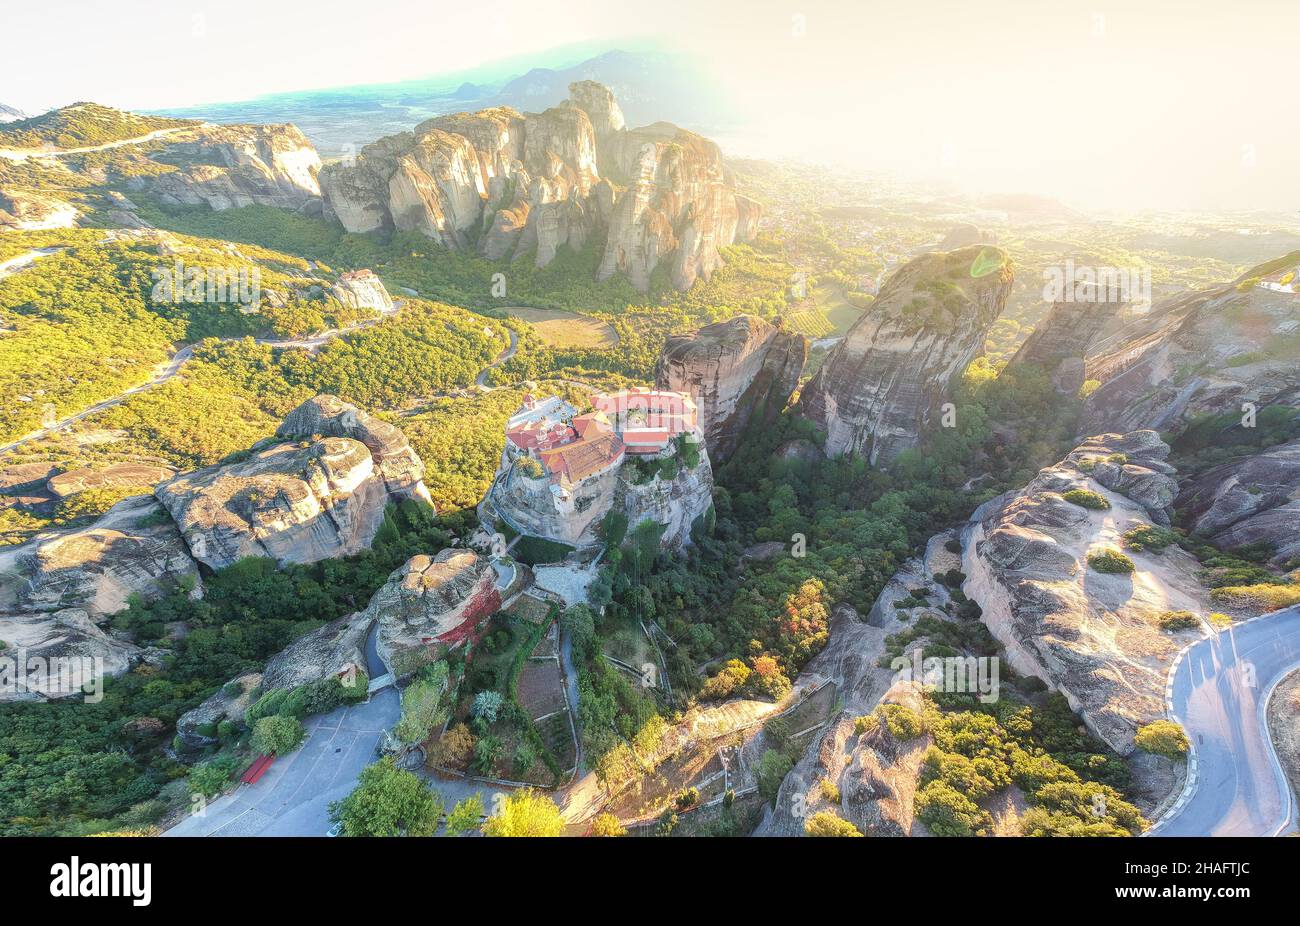 Aerial view over Meteora, a rock formation in central Greece hosting one of the largest most precipitously built complexes of Eastern Orthodox monaste Stock Photo